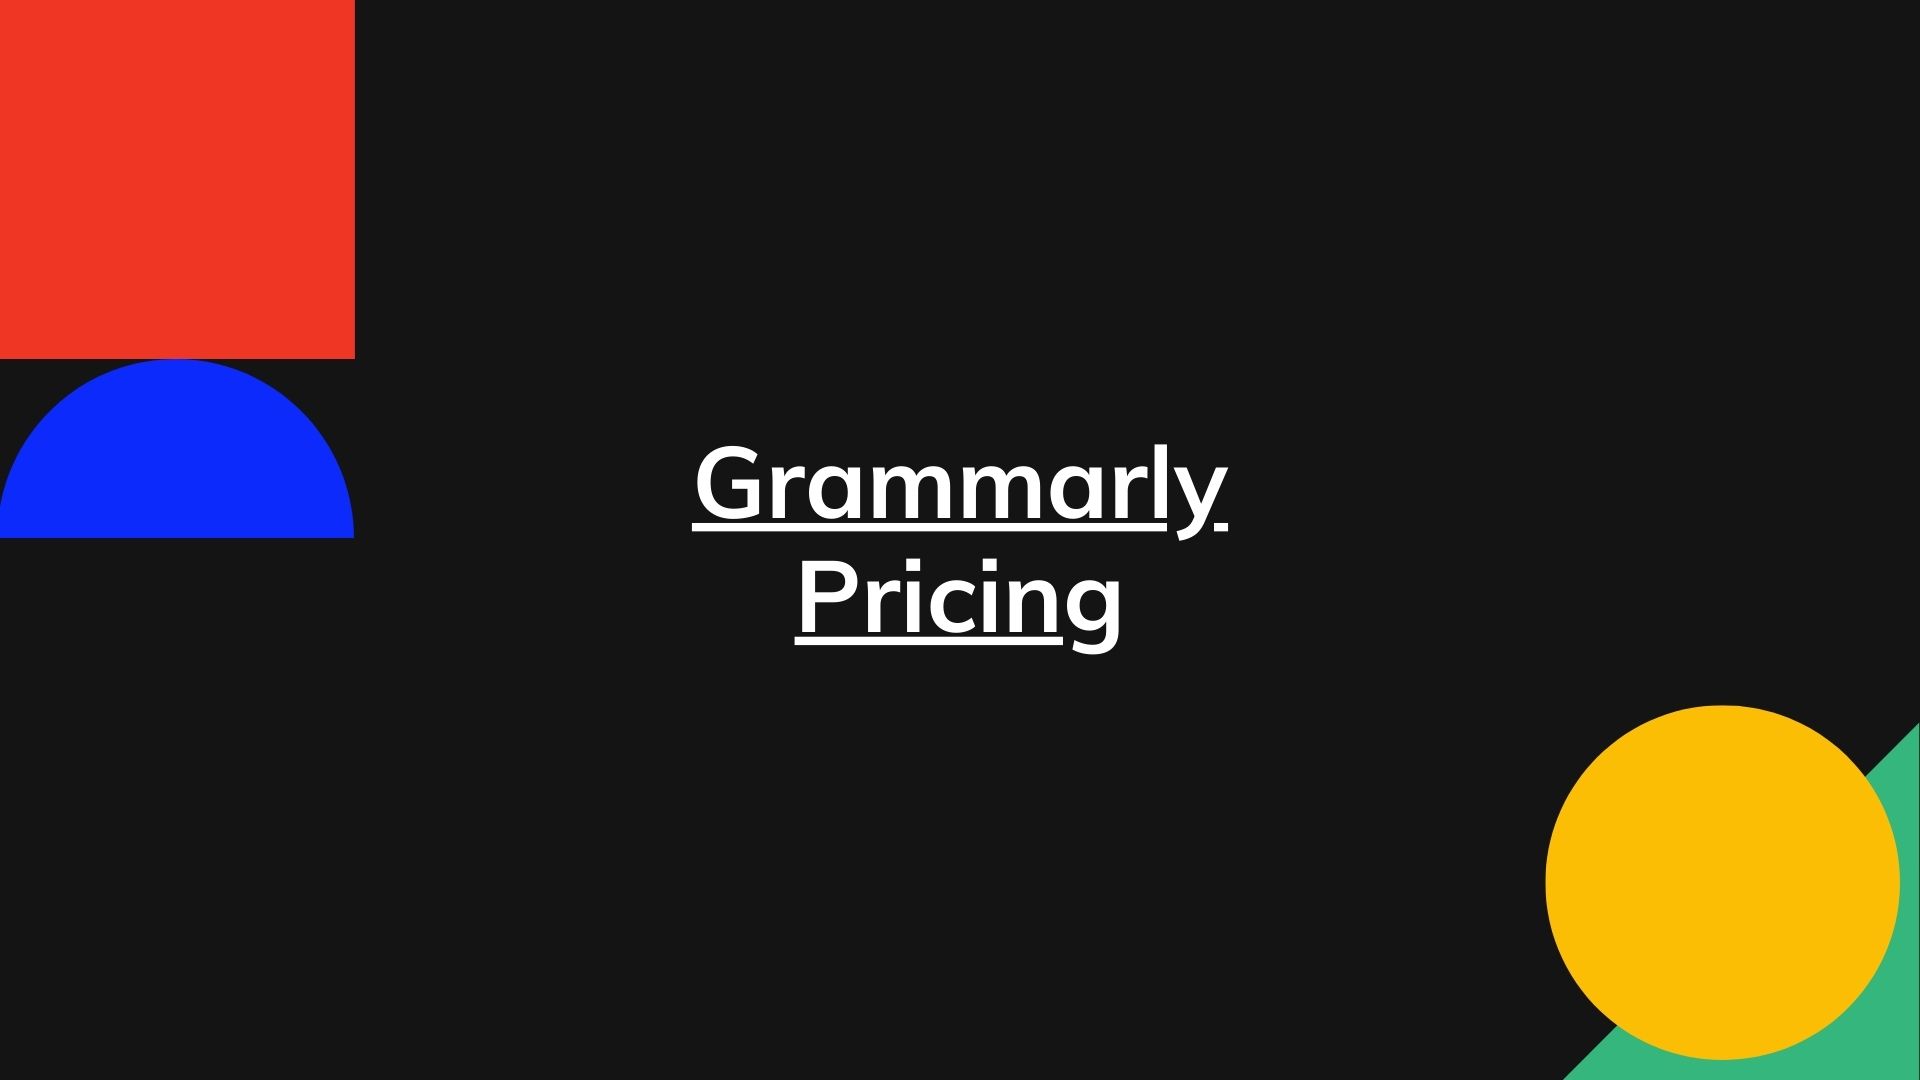 Grammarly Pricing – Prices For All Plans, Enterprise Too!